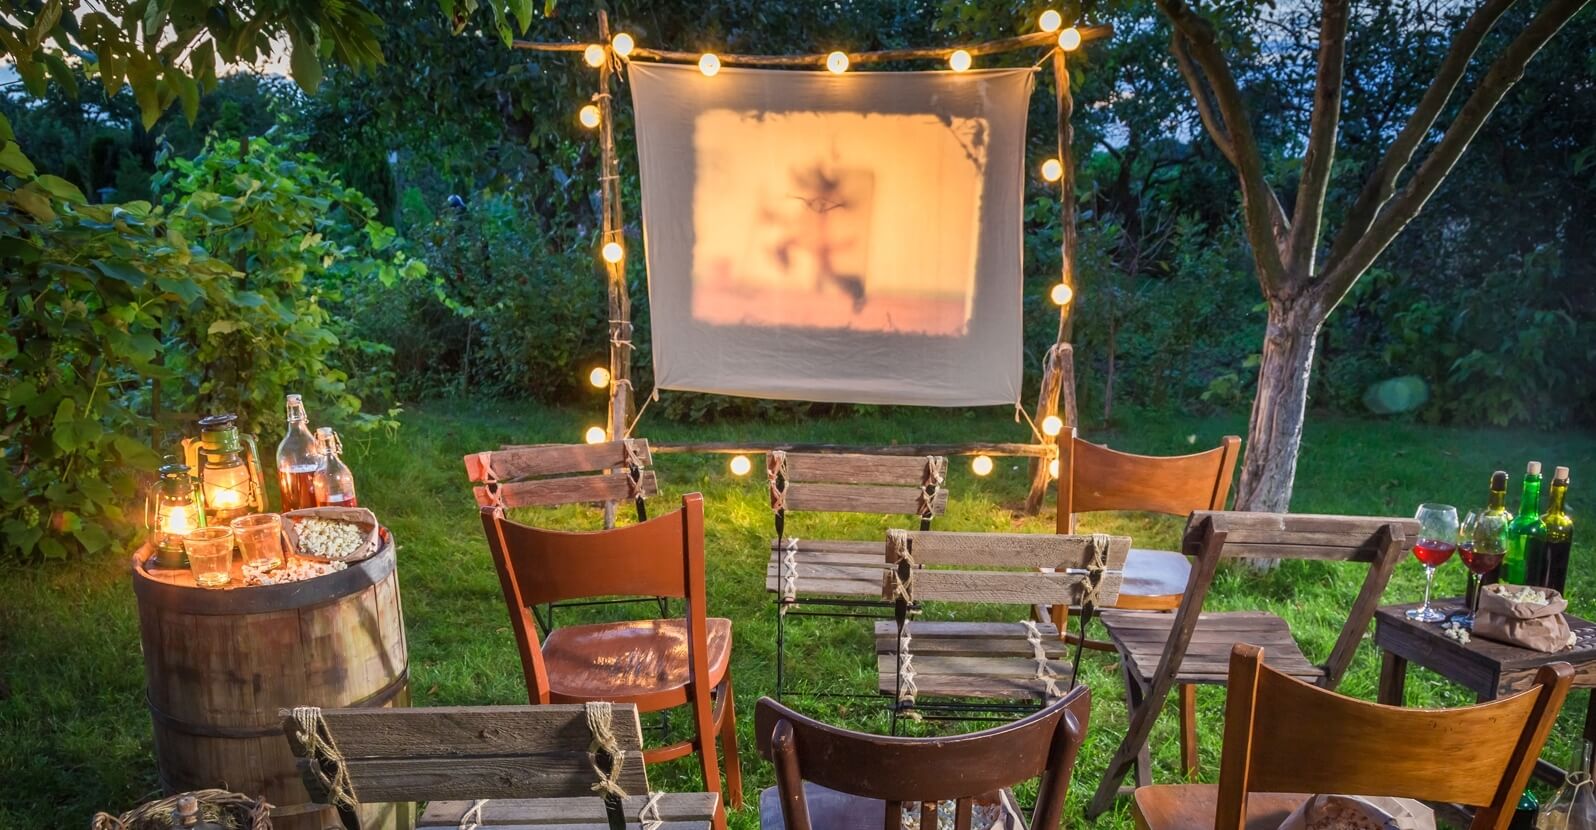 How to Convert Your Backyard into Entertainment Zone